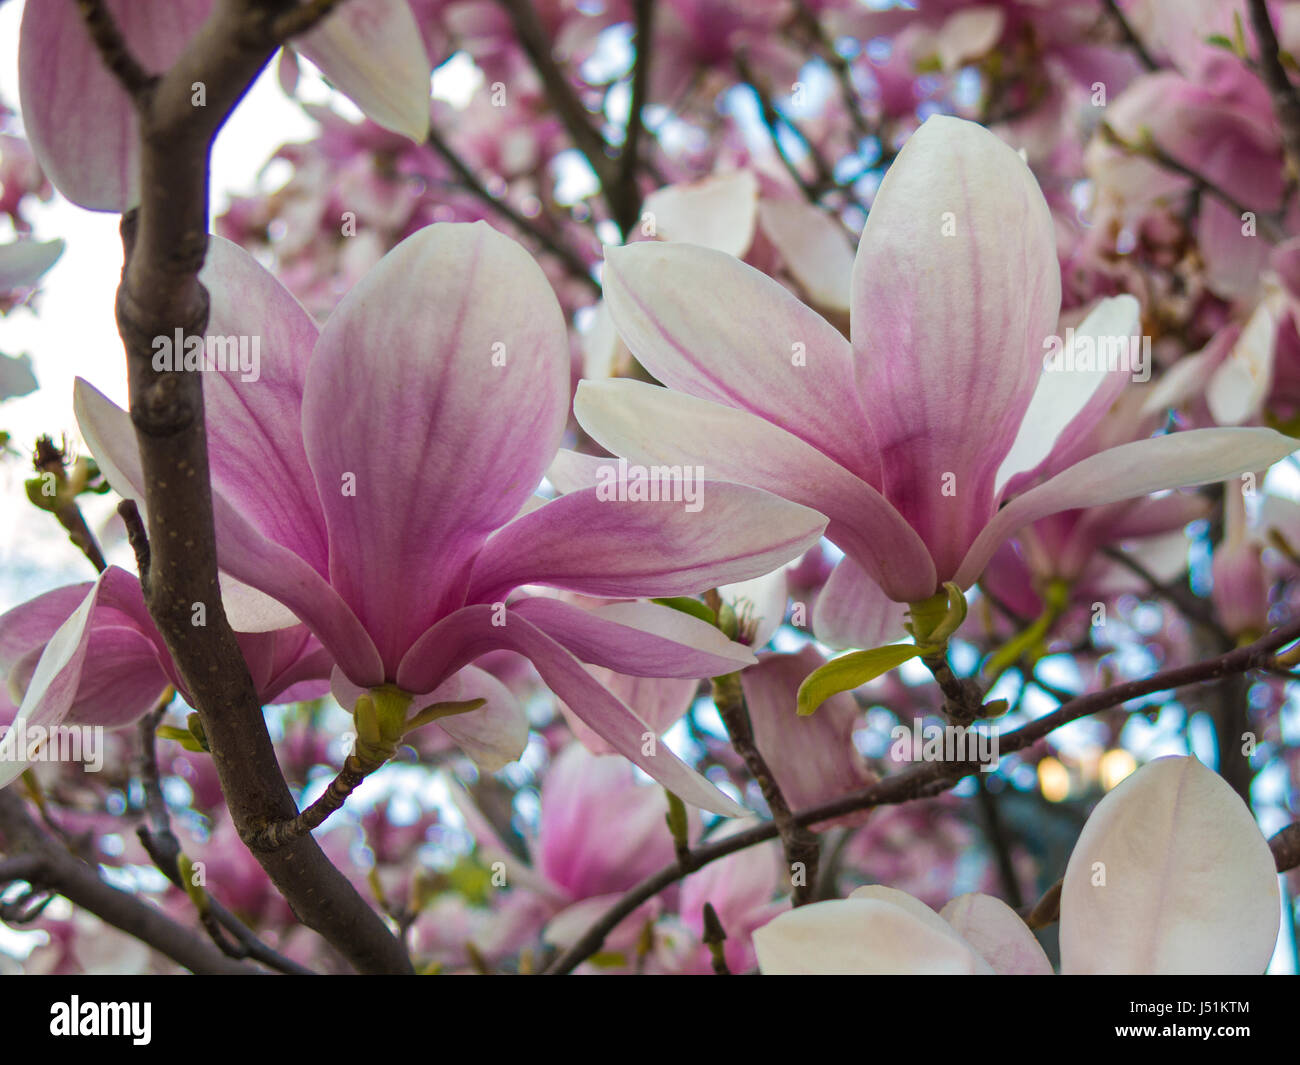 Pink White Magnolia x Soulangeana Blossom in Early Spring Garden Stock Photo